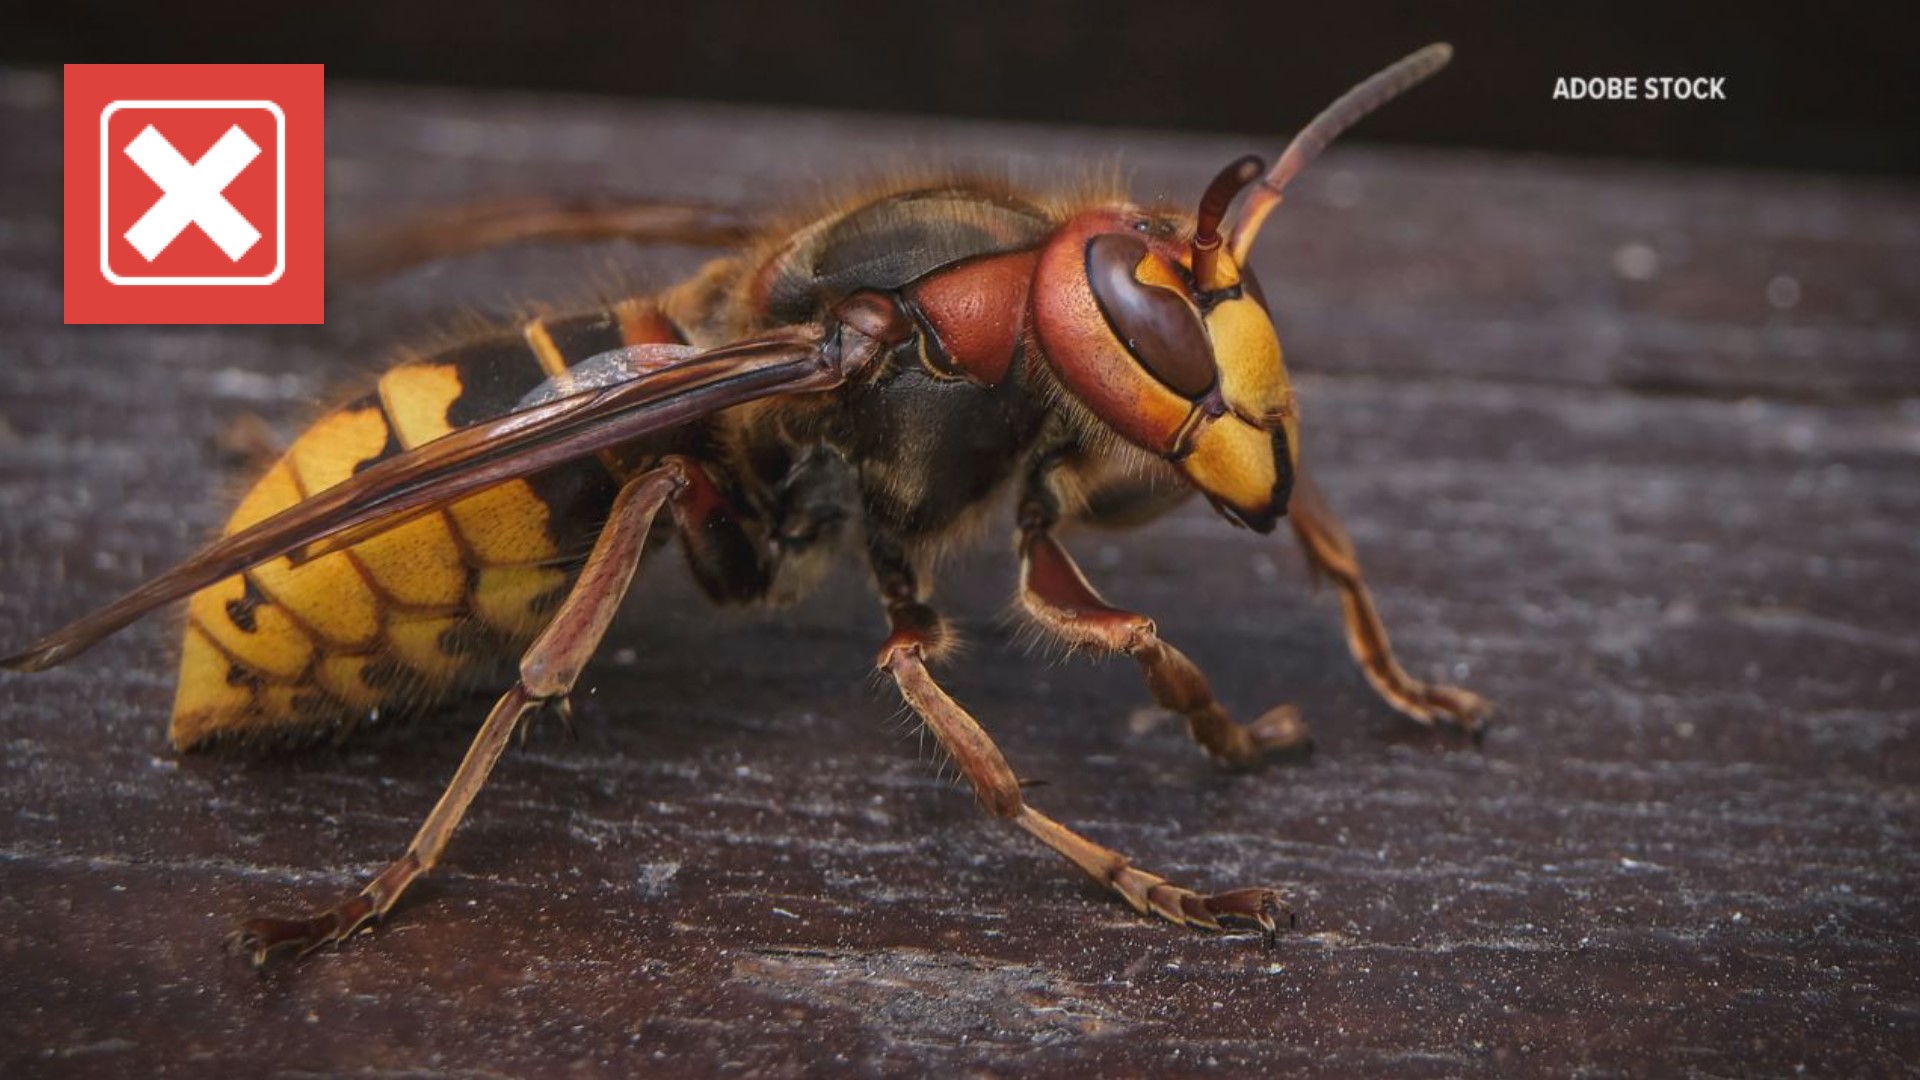 The invasive species of wasp have not been reported in Pa. since they were first found in the U.S. in 2020.